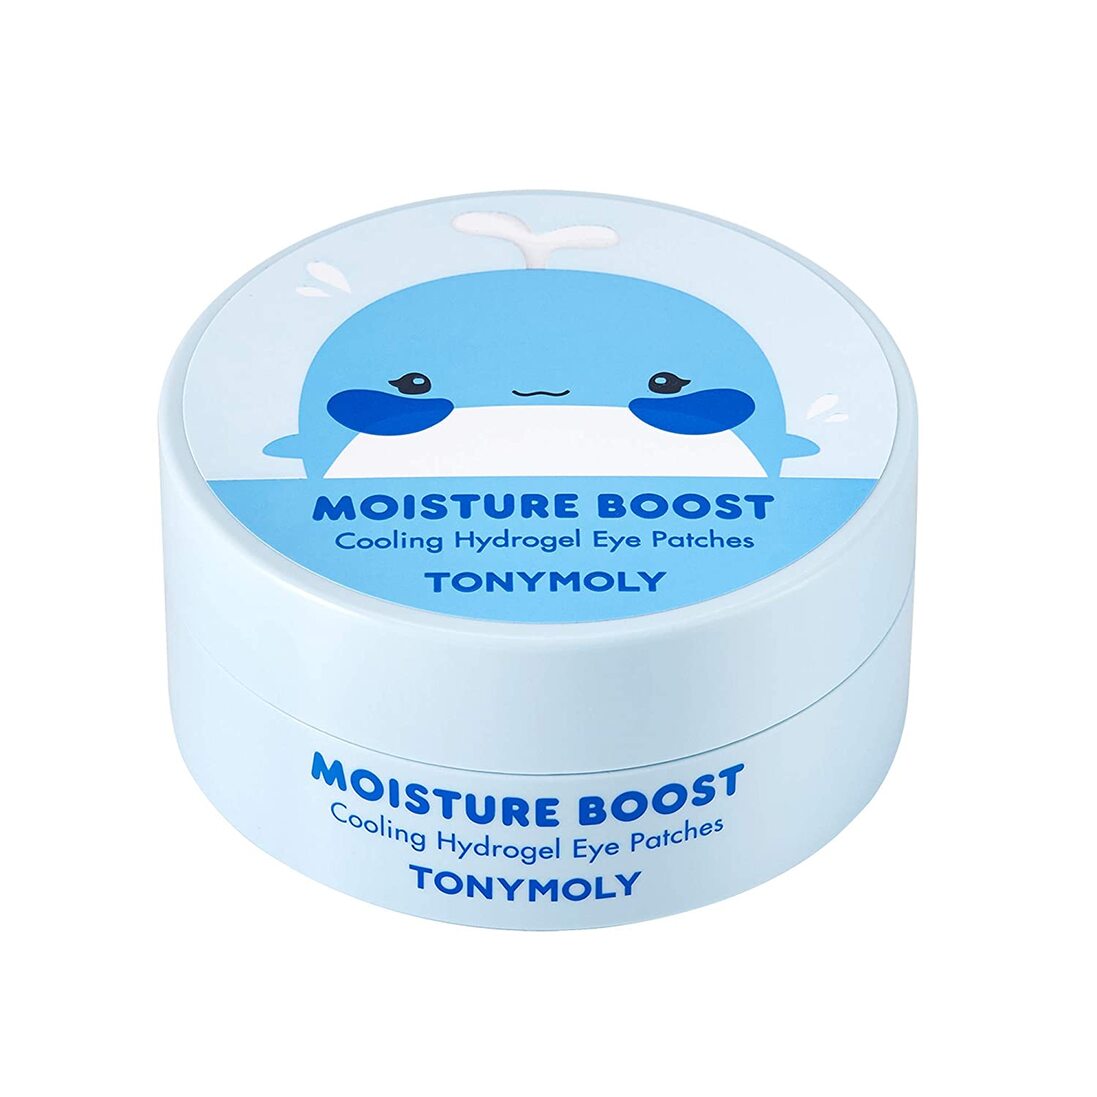 Tonymoly Moisture Boost Hydrogel Eye Patches on white background 